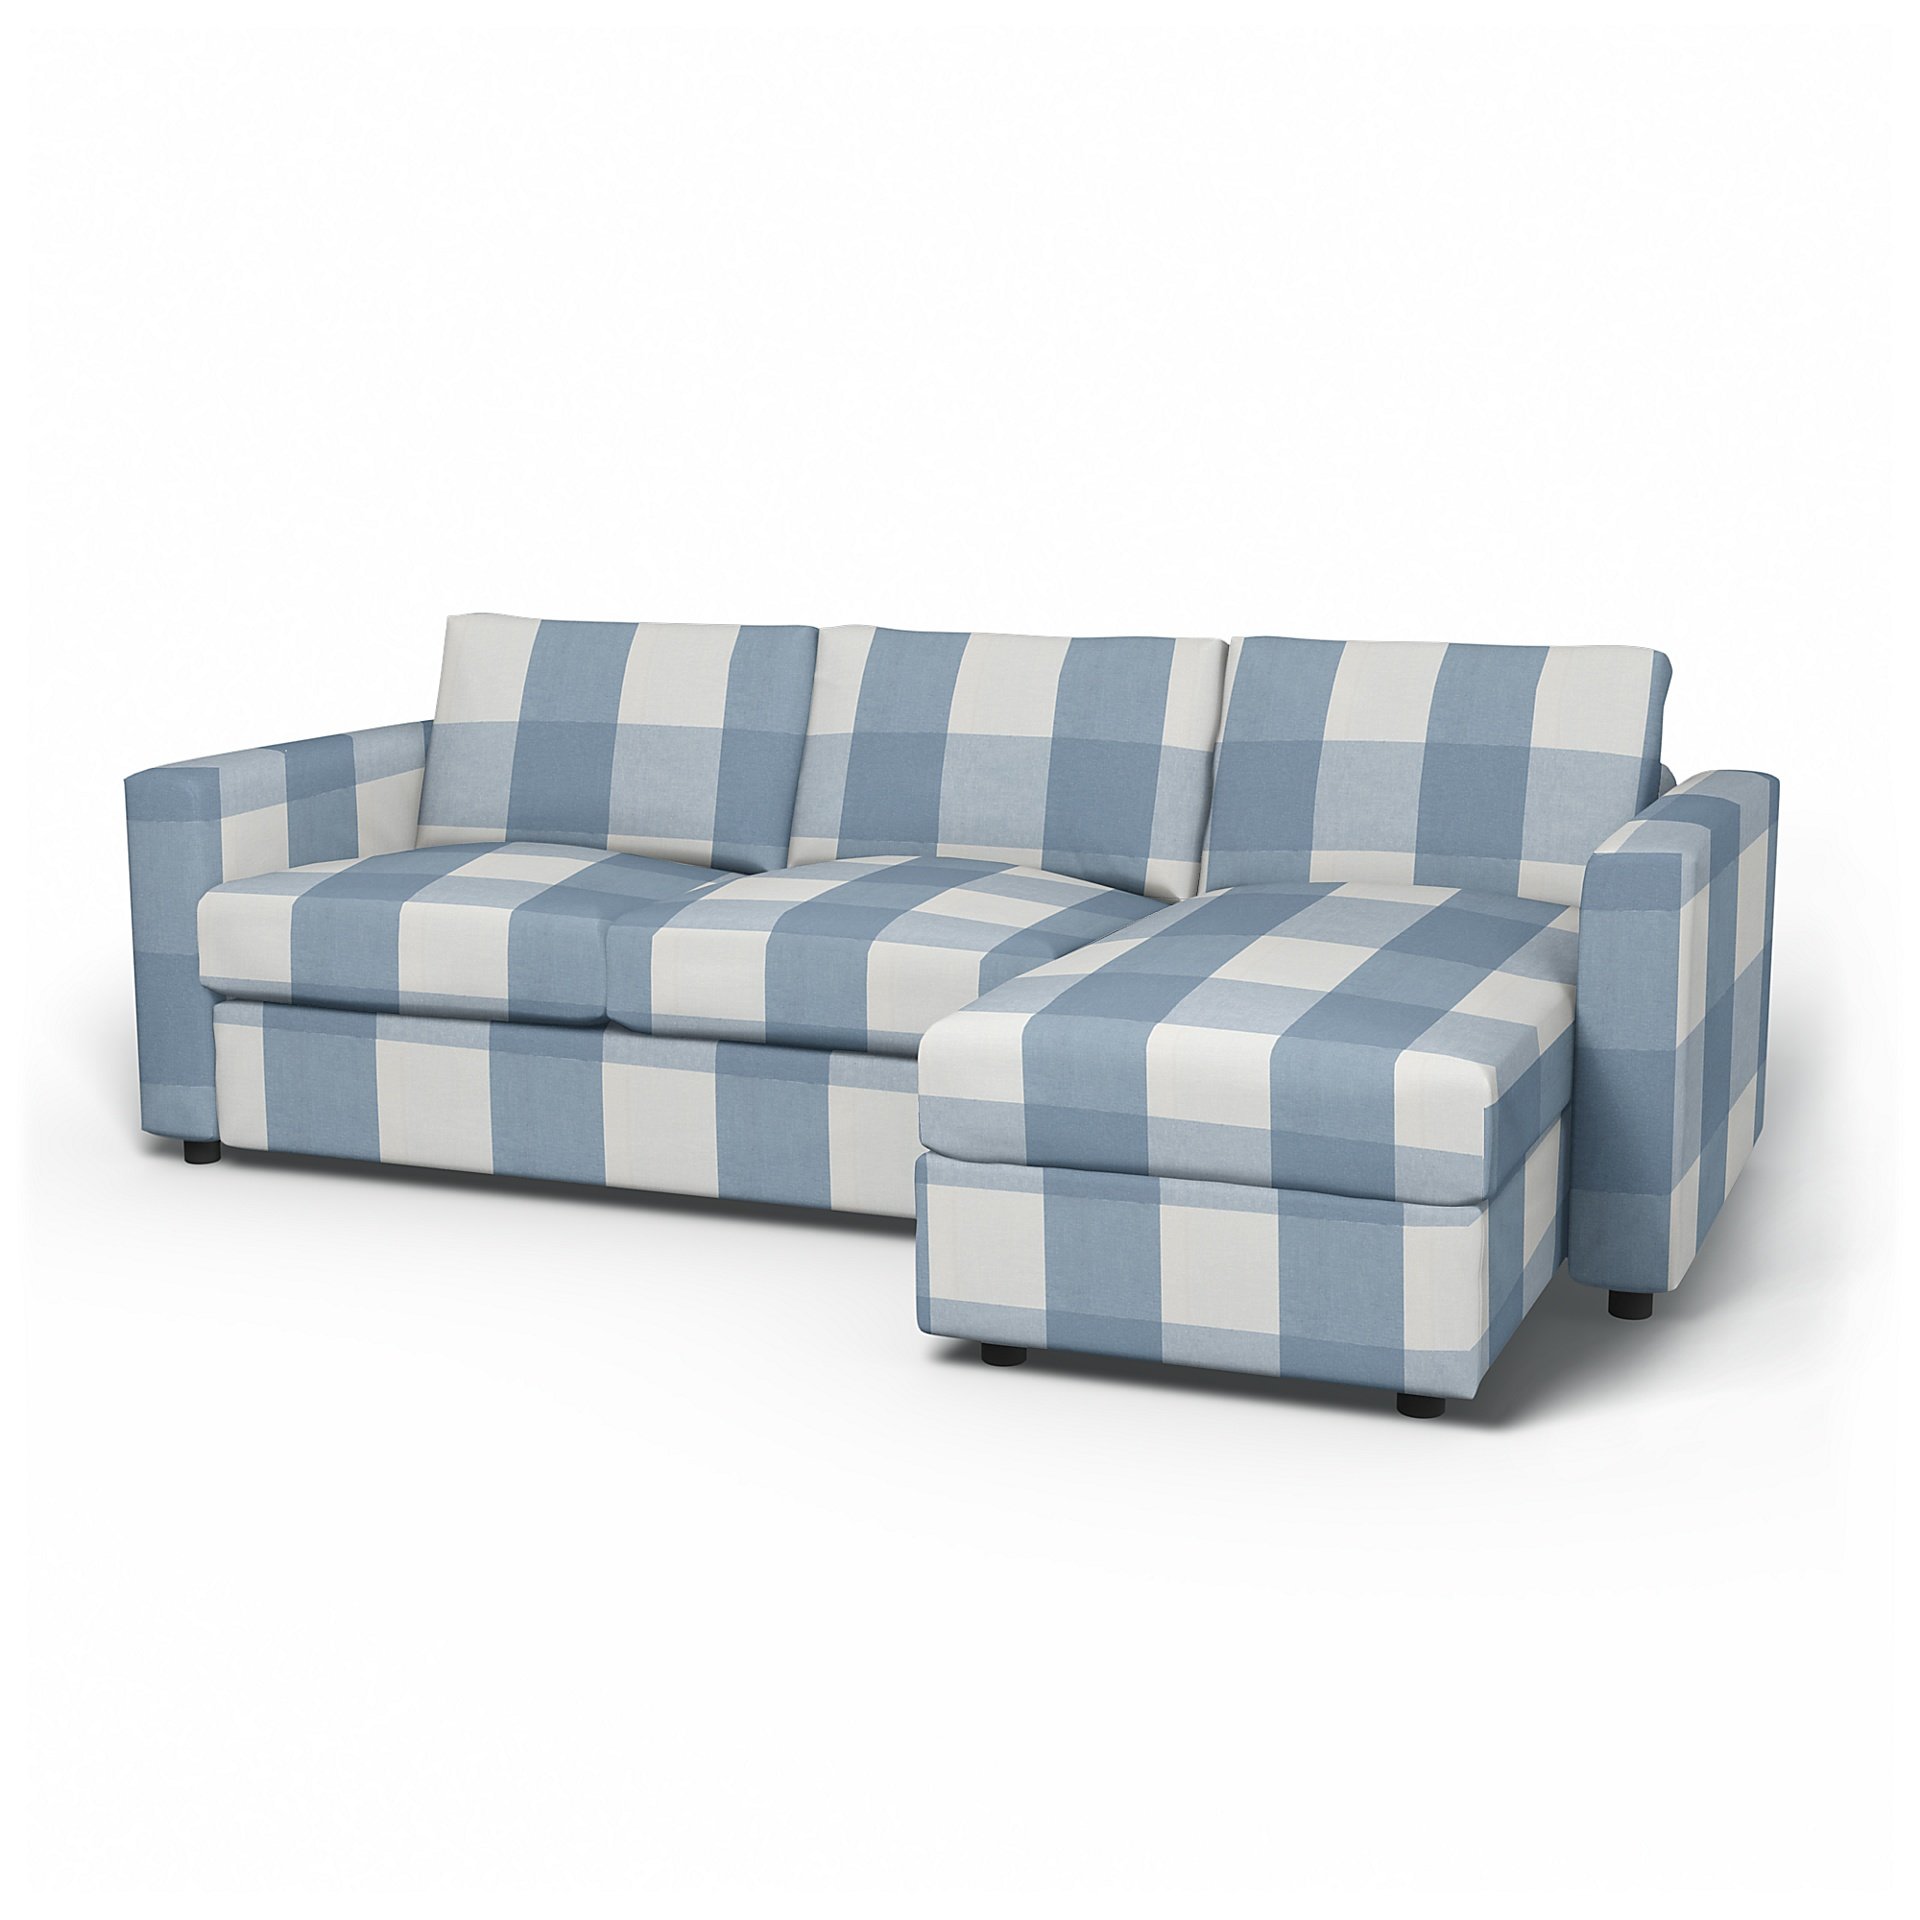 IKEA - Vimle 2 Seater Sofa with Chaise Cover, Sky Blue, Linen - Bemz